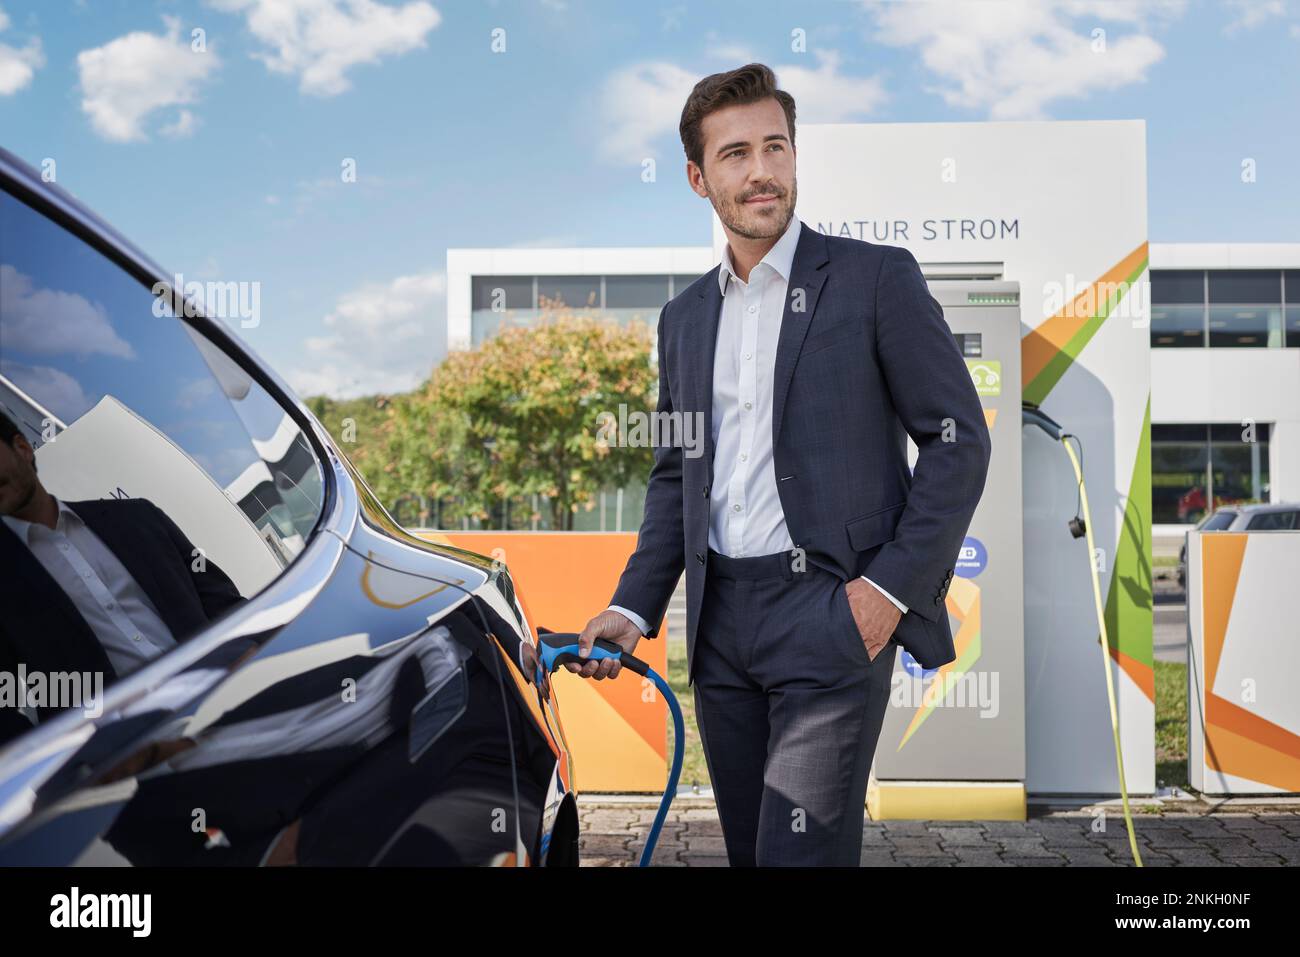 Smiling young businessman holding plug by car at electric vehicle charging station Stock Photo